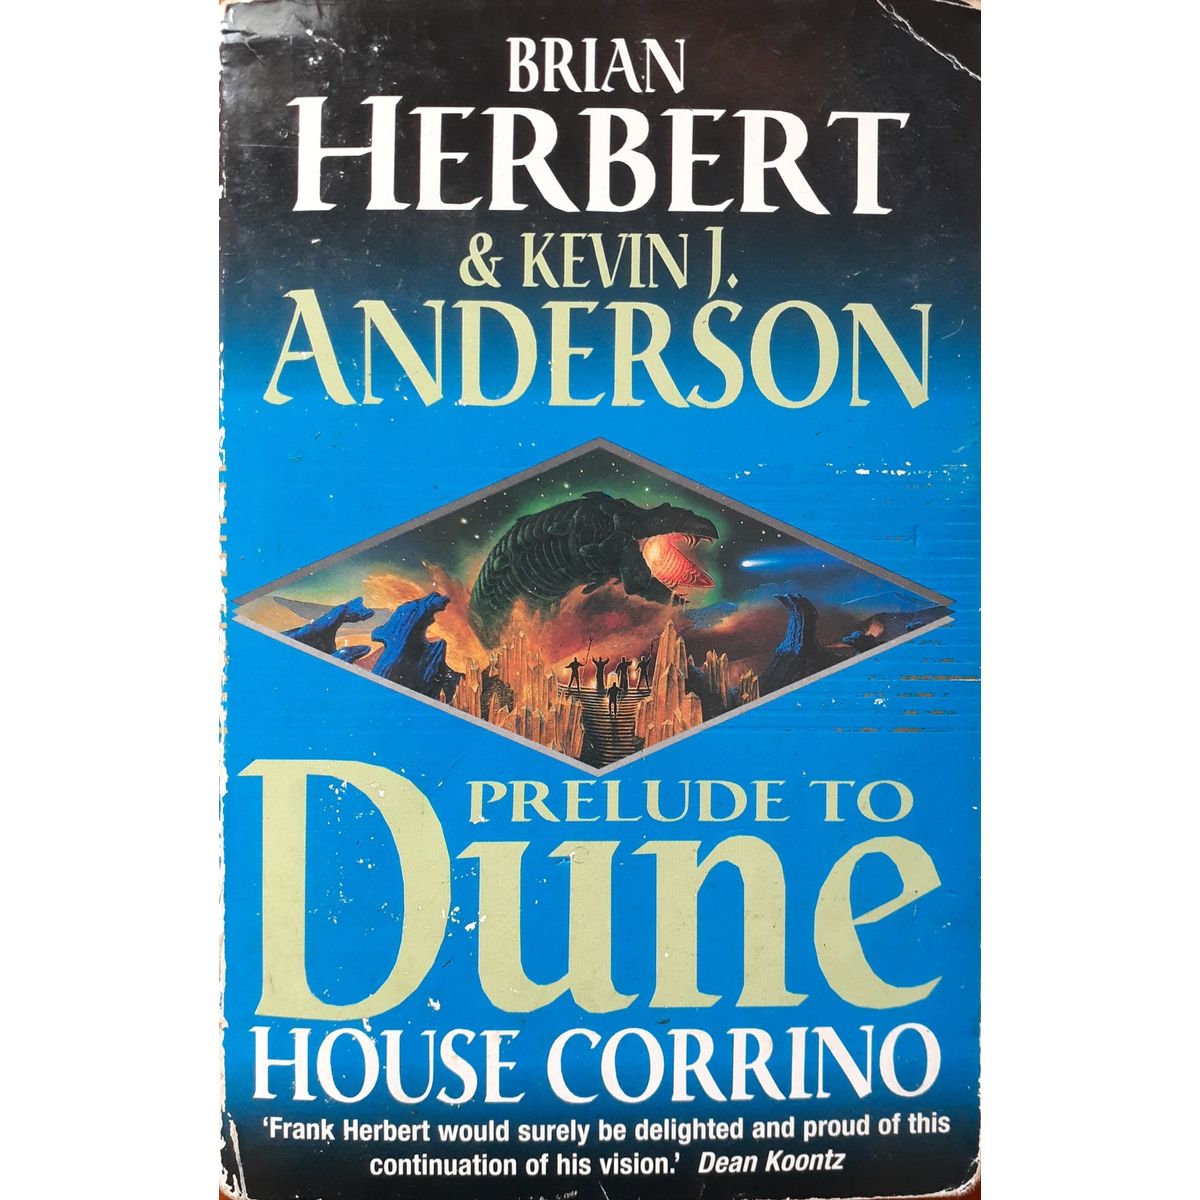 ISBN: 9780340751800 / 0340751800 - Prelude to Dune: House Corrino by Brian Herbert & Kevin J. Anderson [2002]